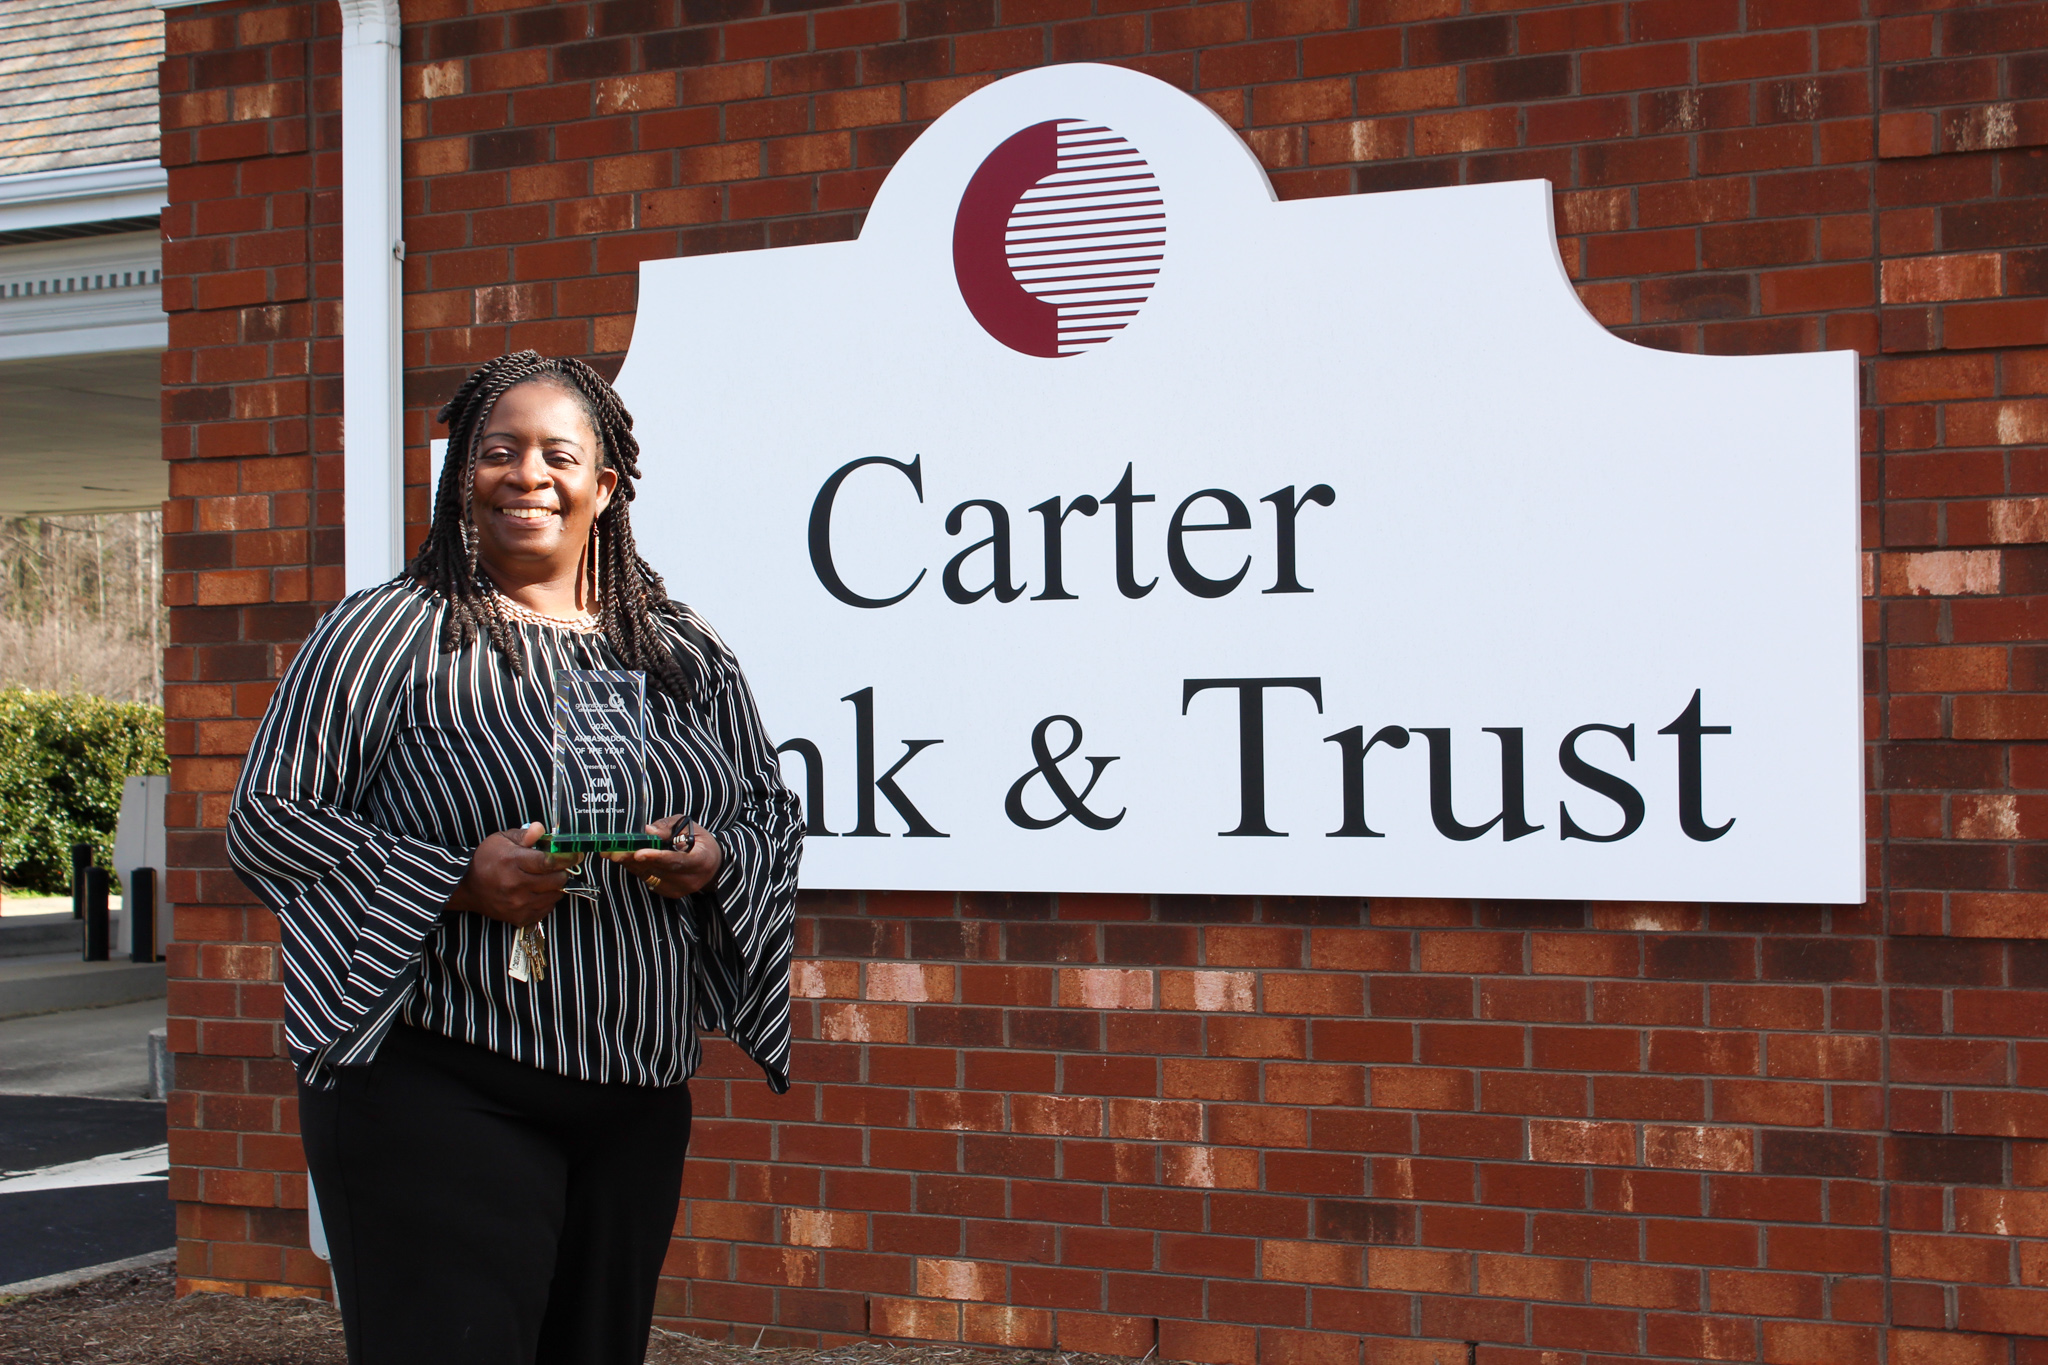 Carter Bank & Trust, Friday, February 12, 2021, Press release picture